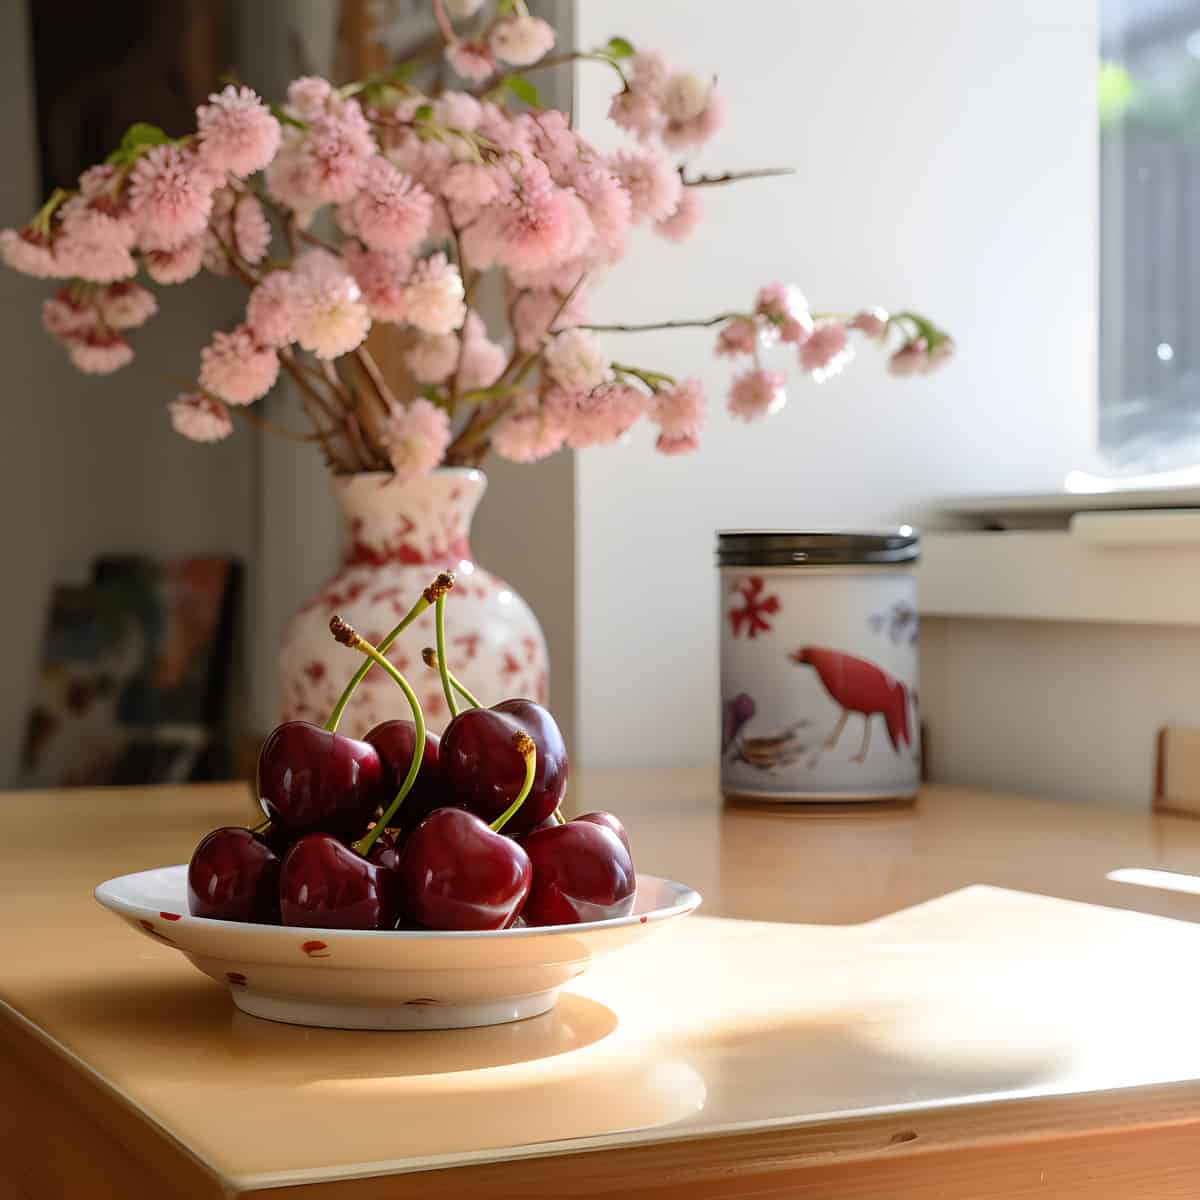 Taiwan Cherries on a kitchen counter